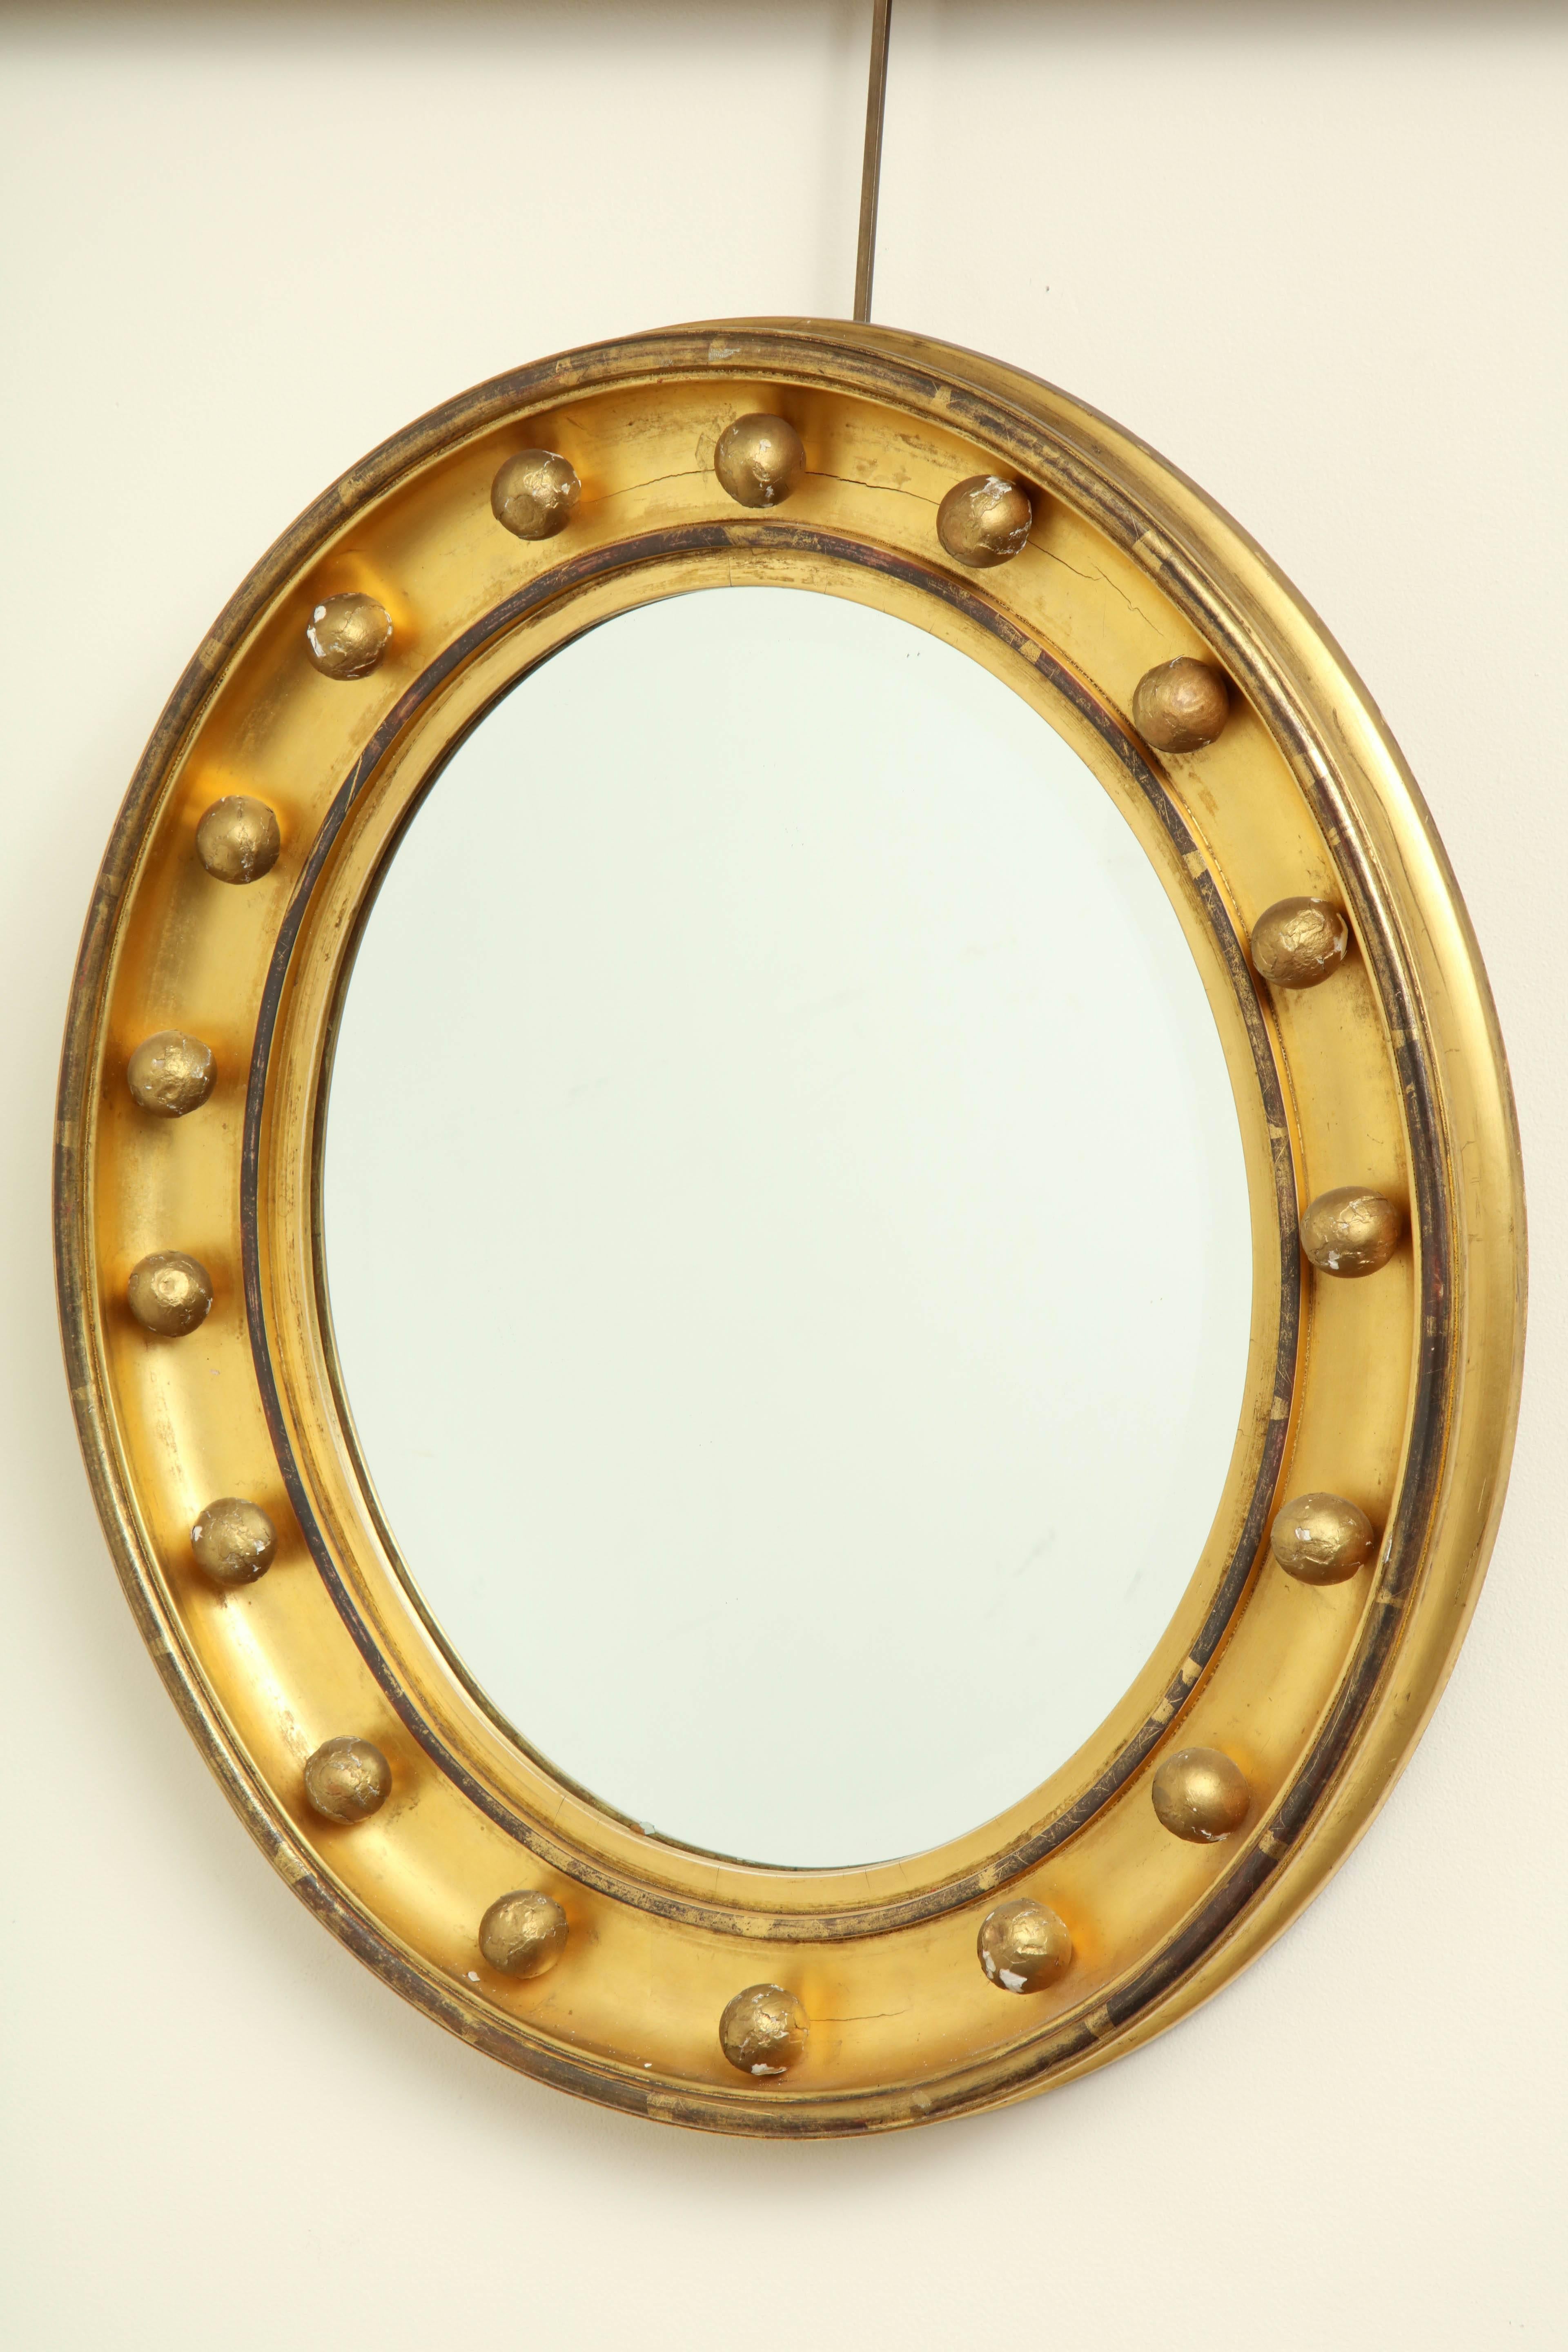 19th century English, beveled mirror in a gilded oval frame.